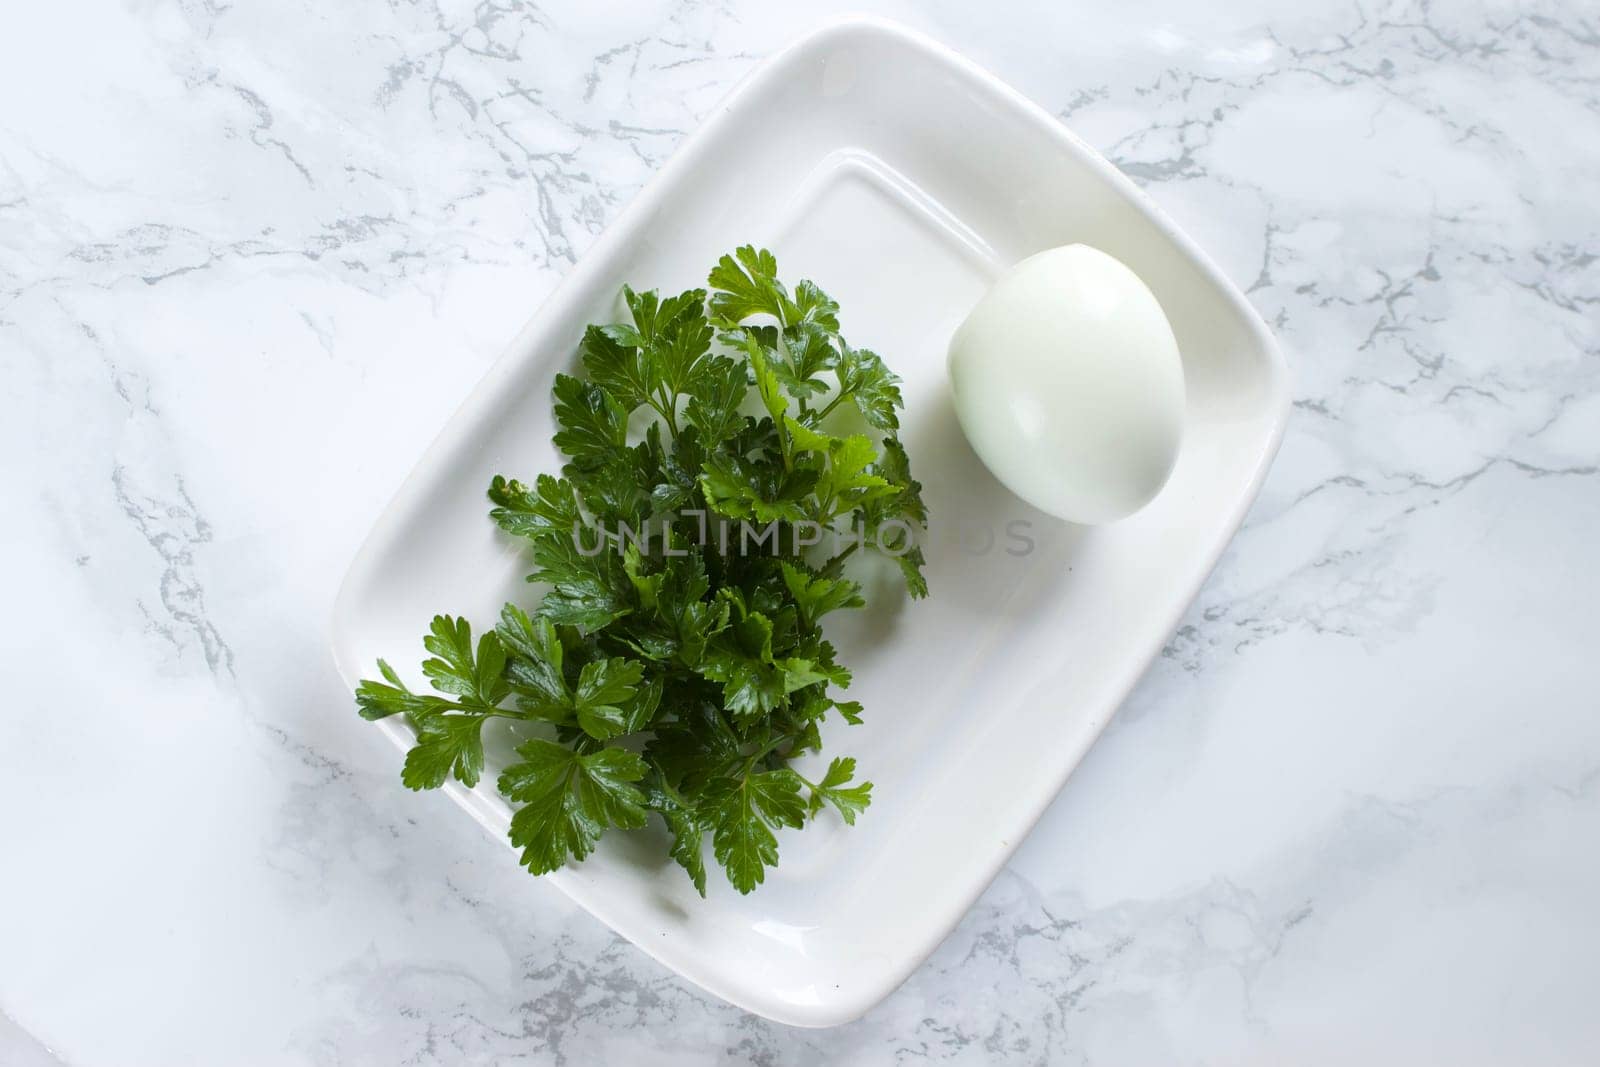 Boiled chicken egg and parsley on a white plate on a marble background. High quality photo